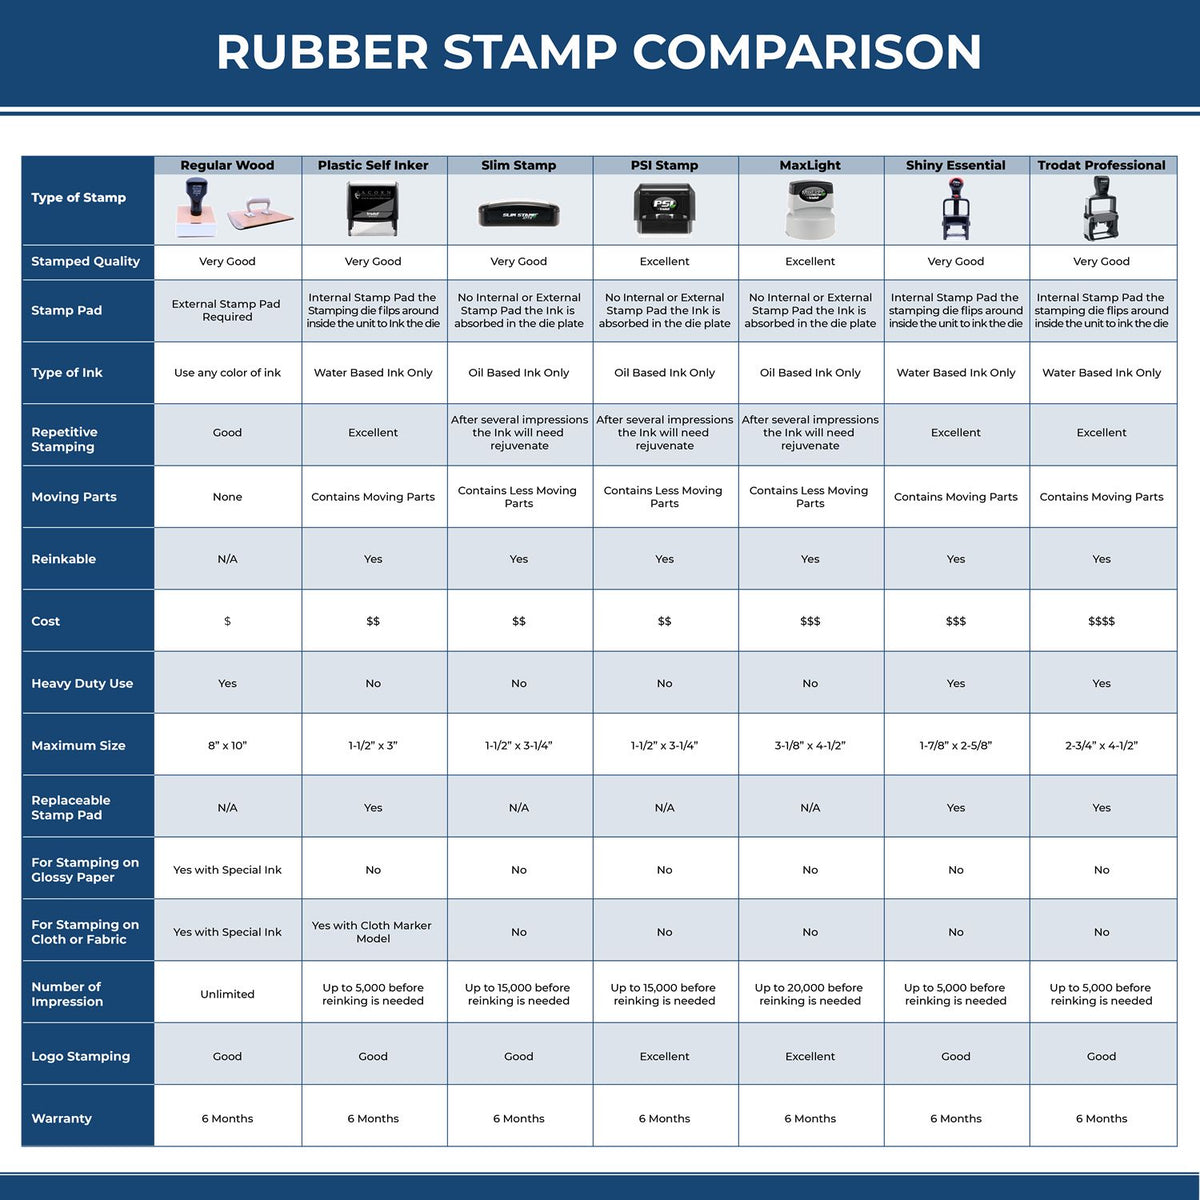 Large Self-Inking Bold Draft Stamp 4903S Rubber Stamp Comparison